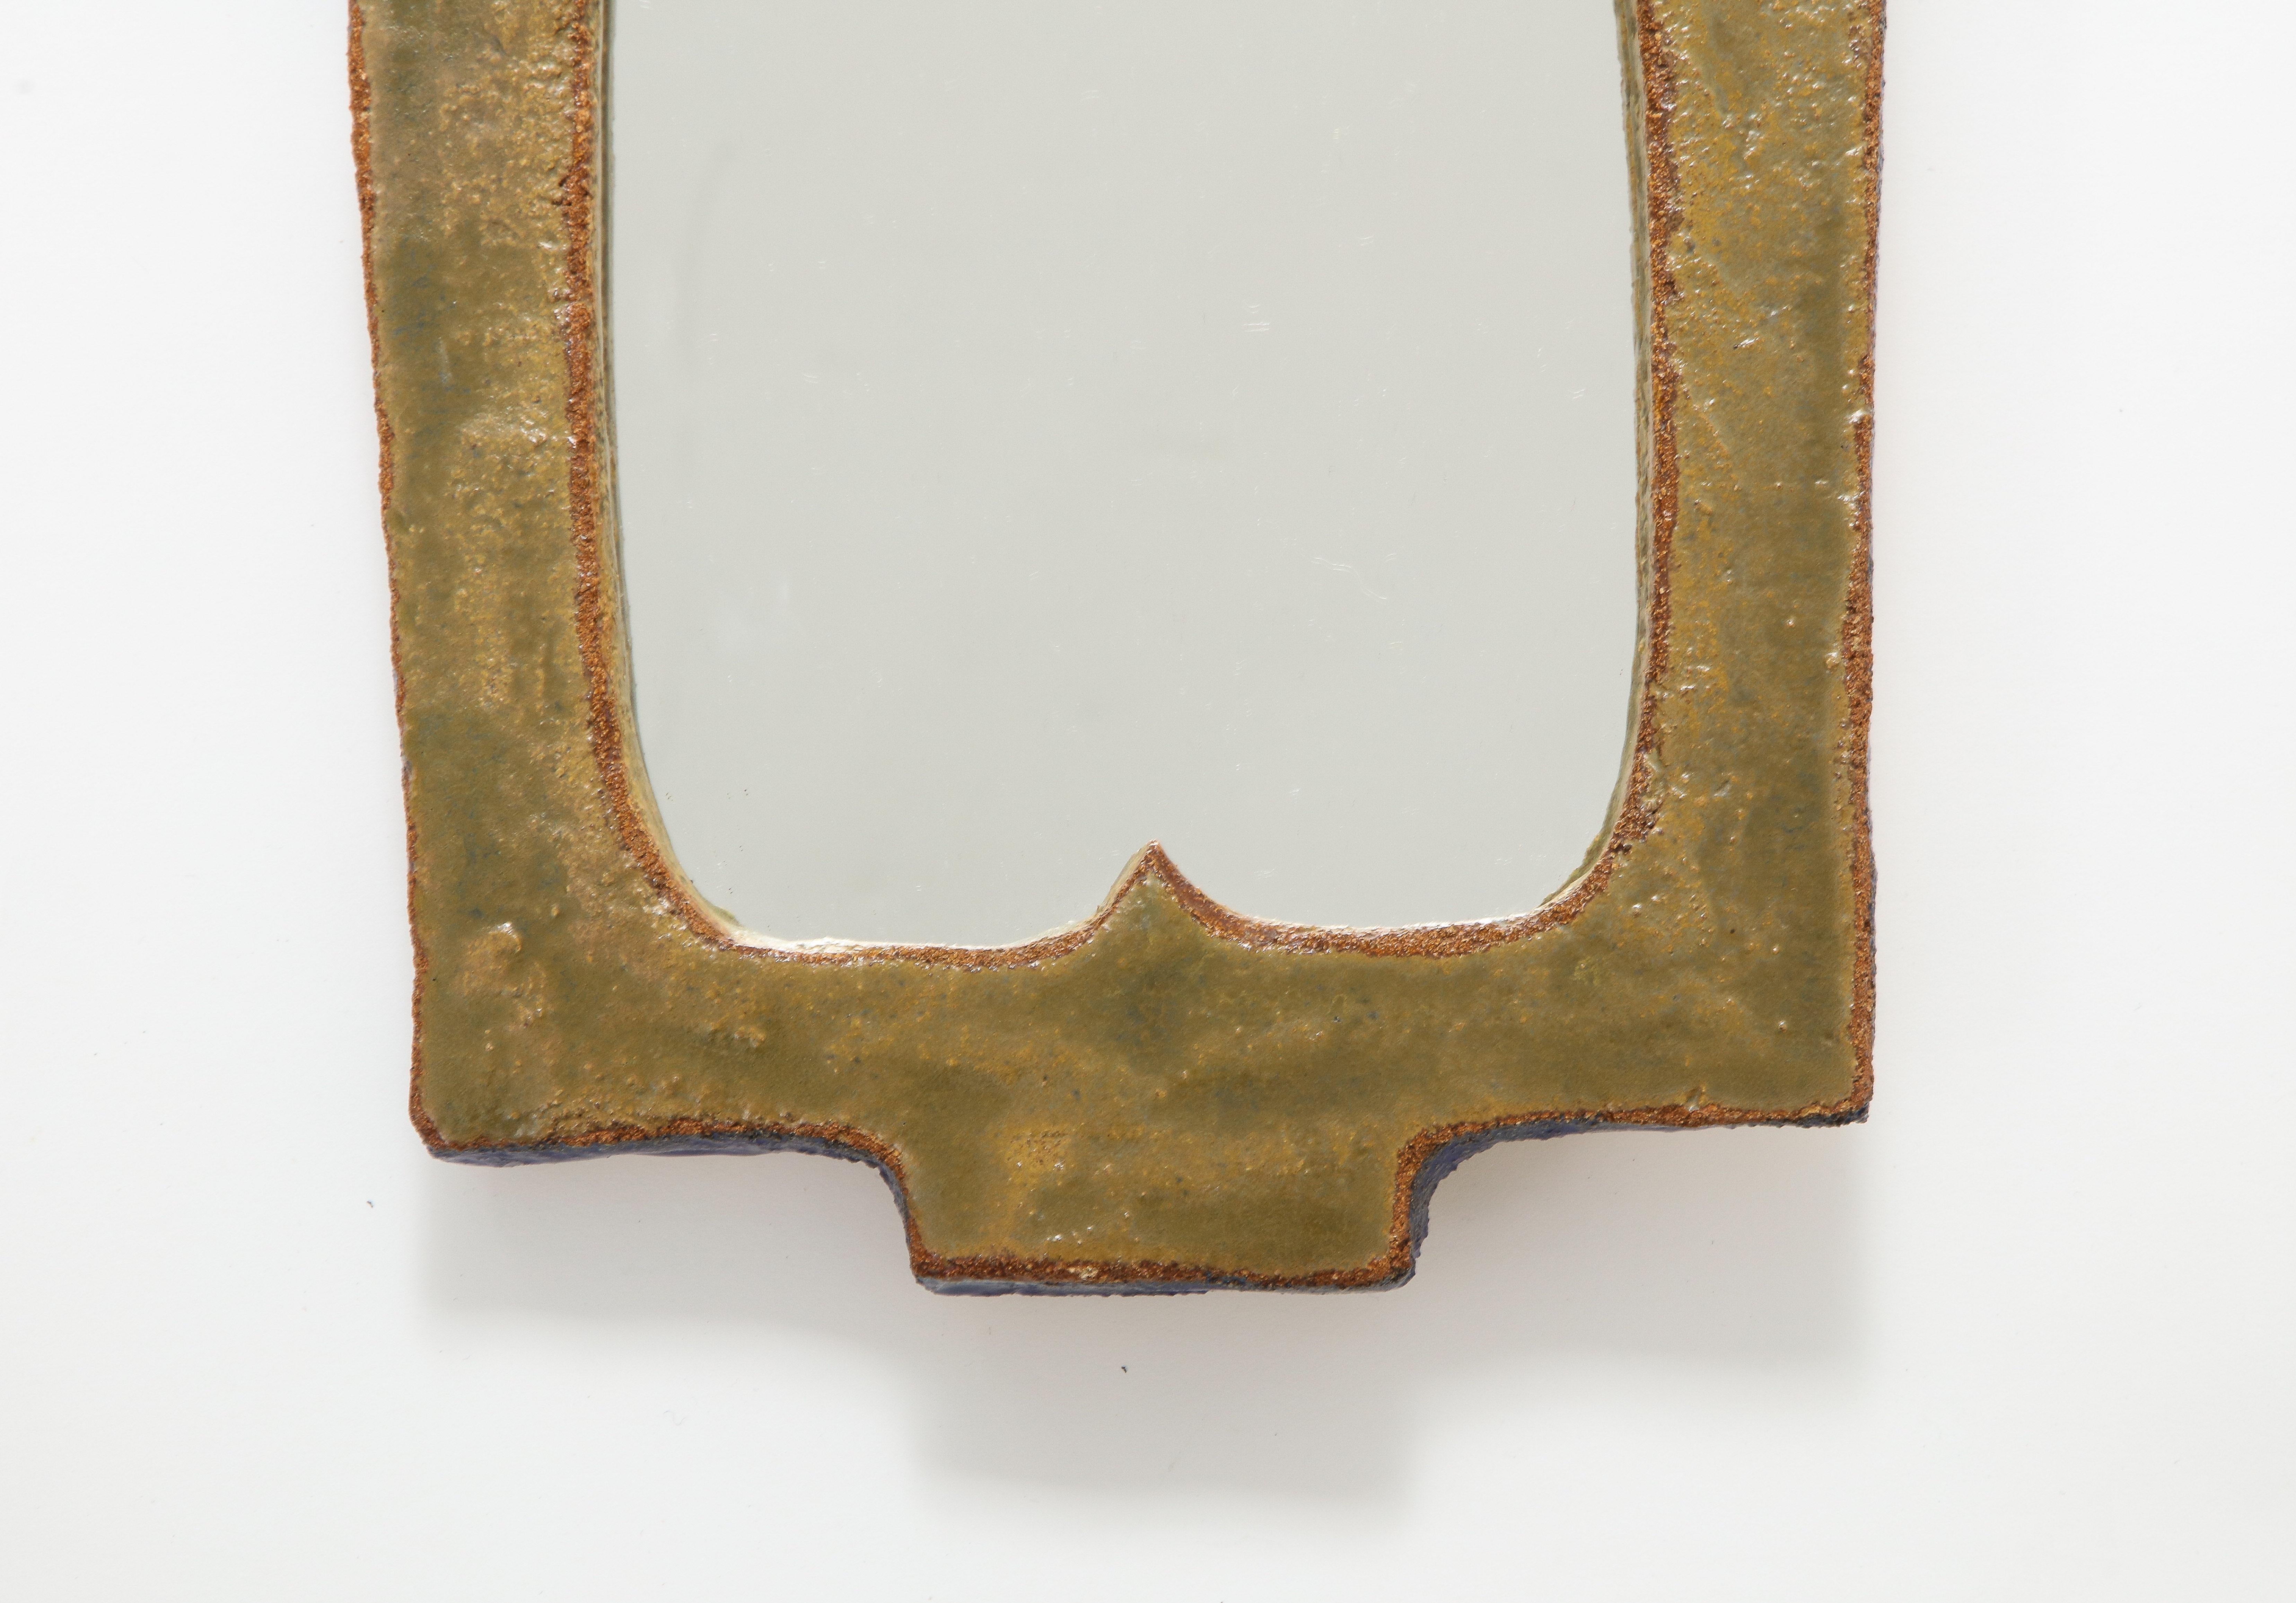 Mid-Century Modern Rare Enameled Ceramic Mirror by Les Argonautes, France, c. 1960 'Signed' For Sale